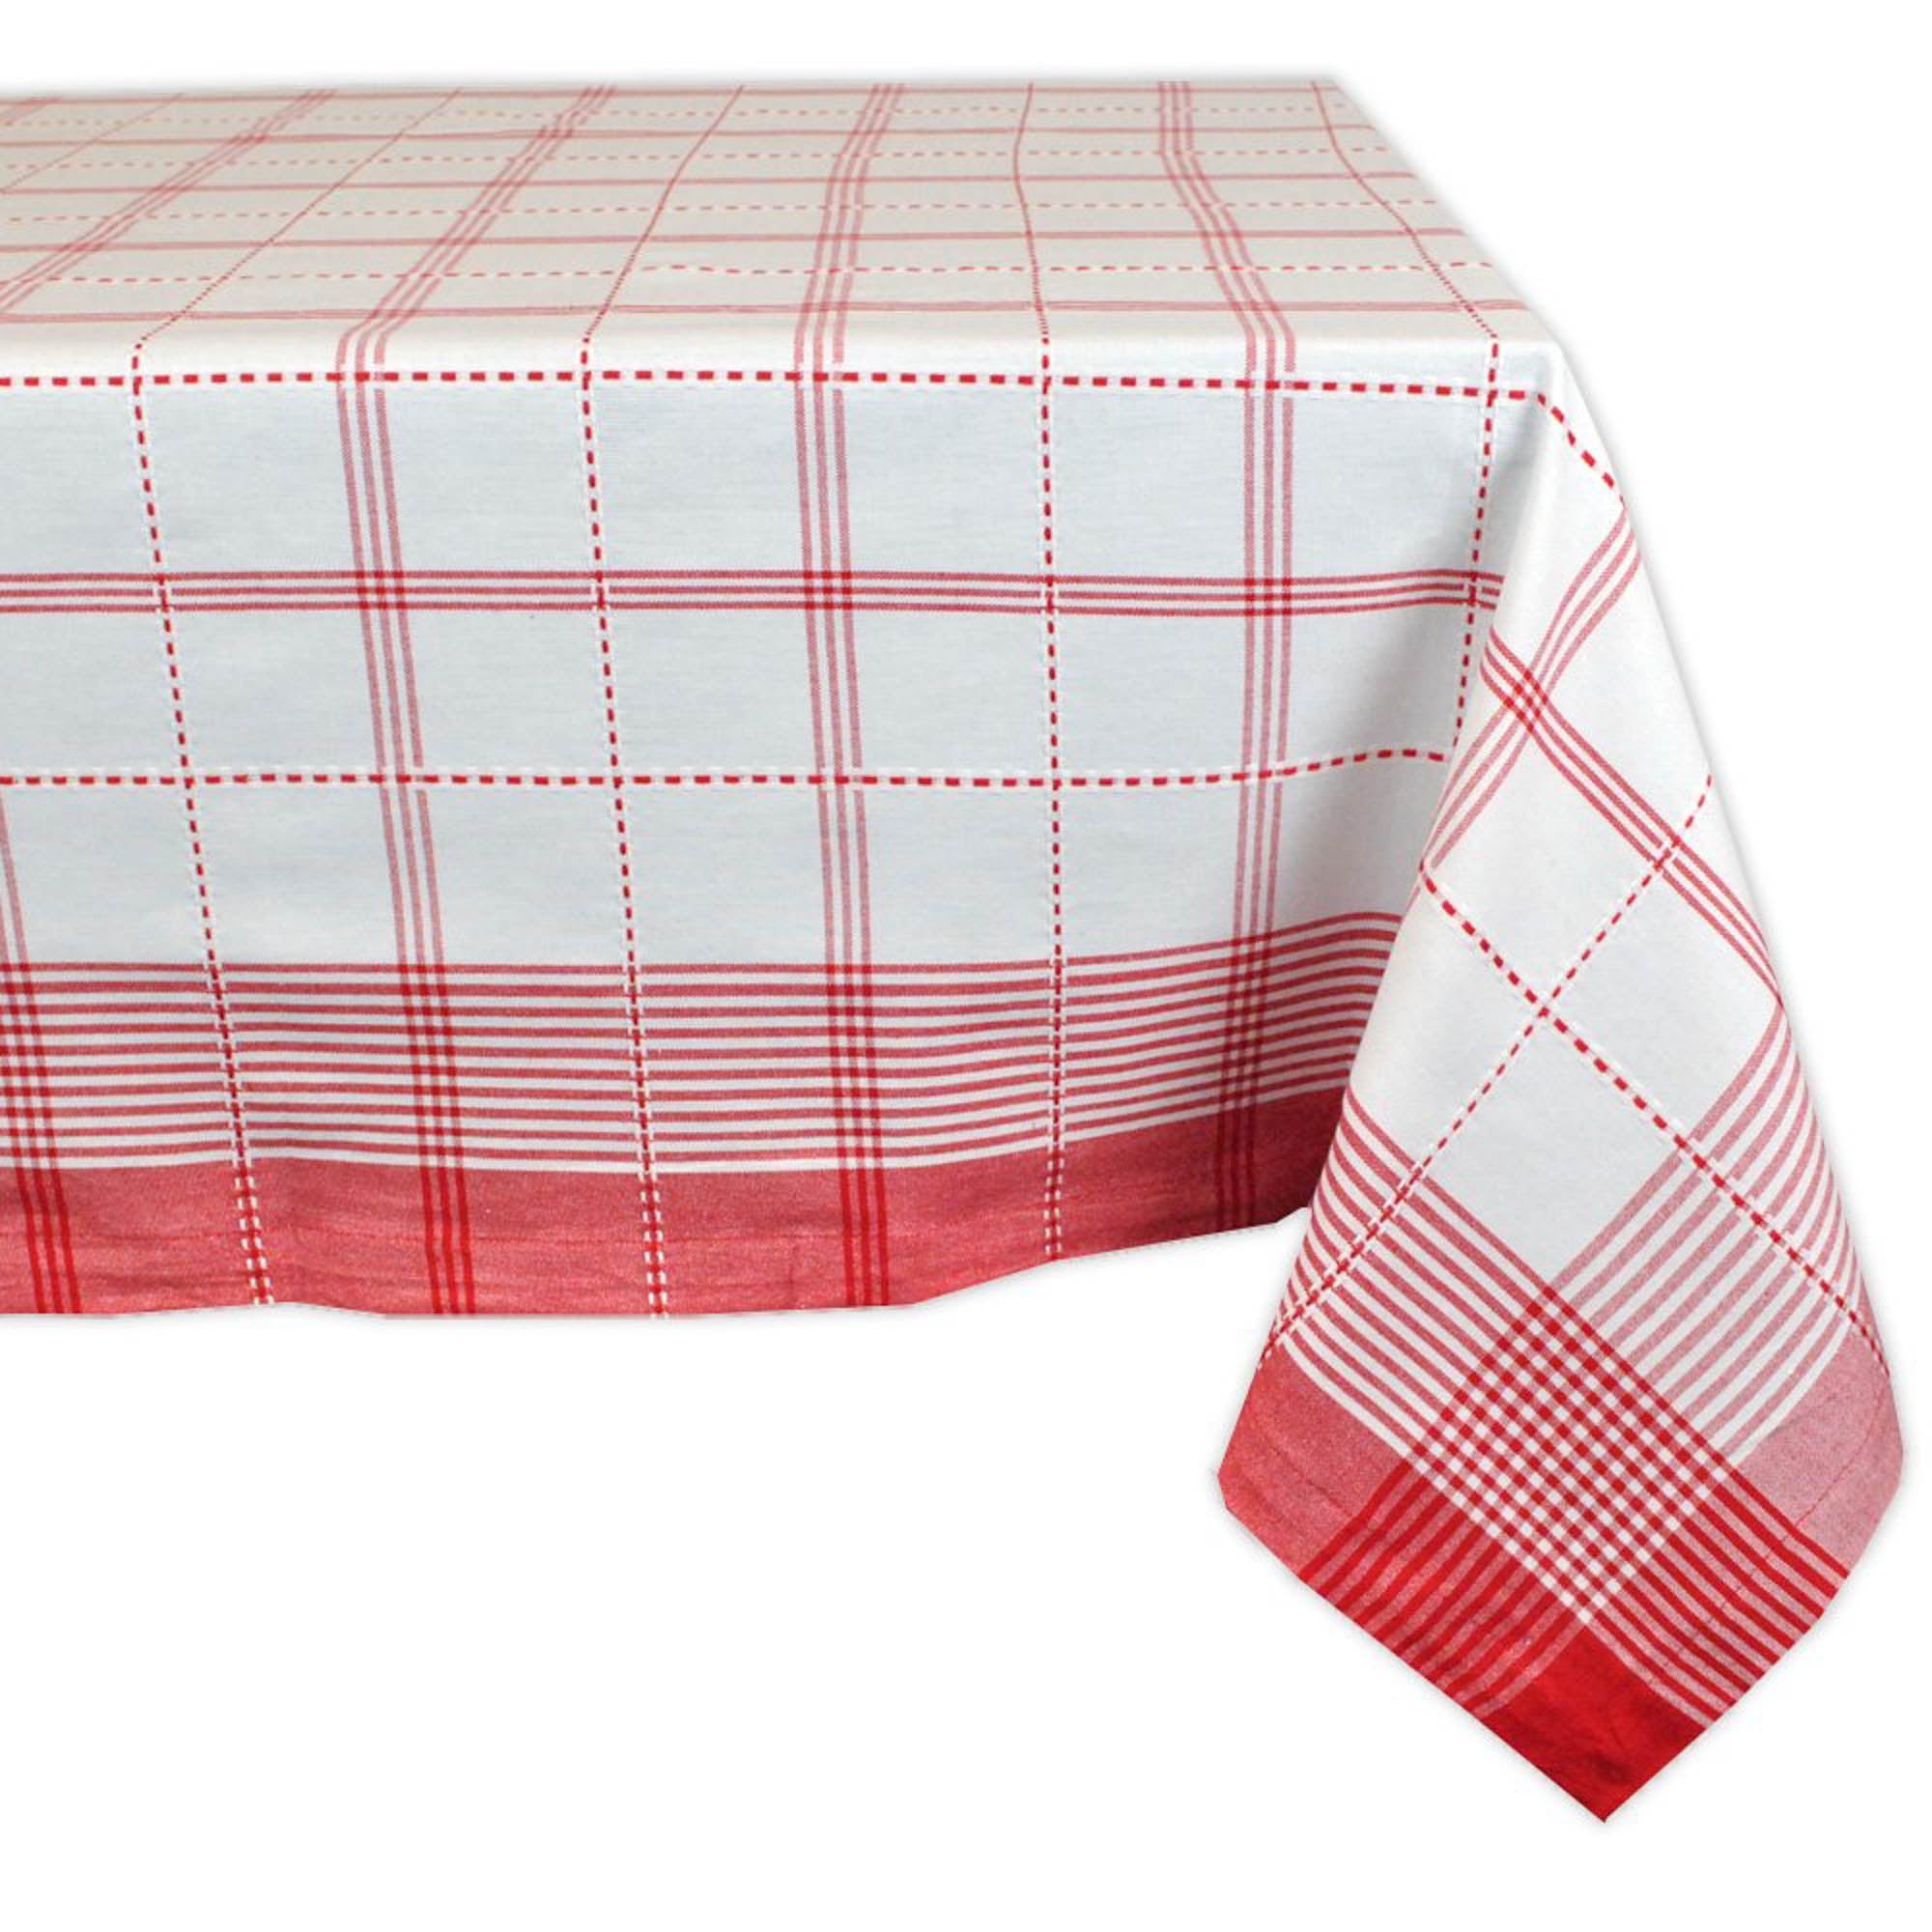 Machine Washable Dinner and Holiday Tablecloth 60x84" Sailor DII 100% Cotton